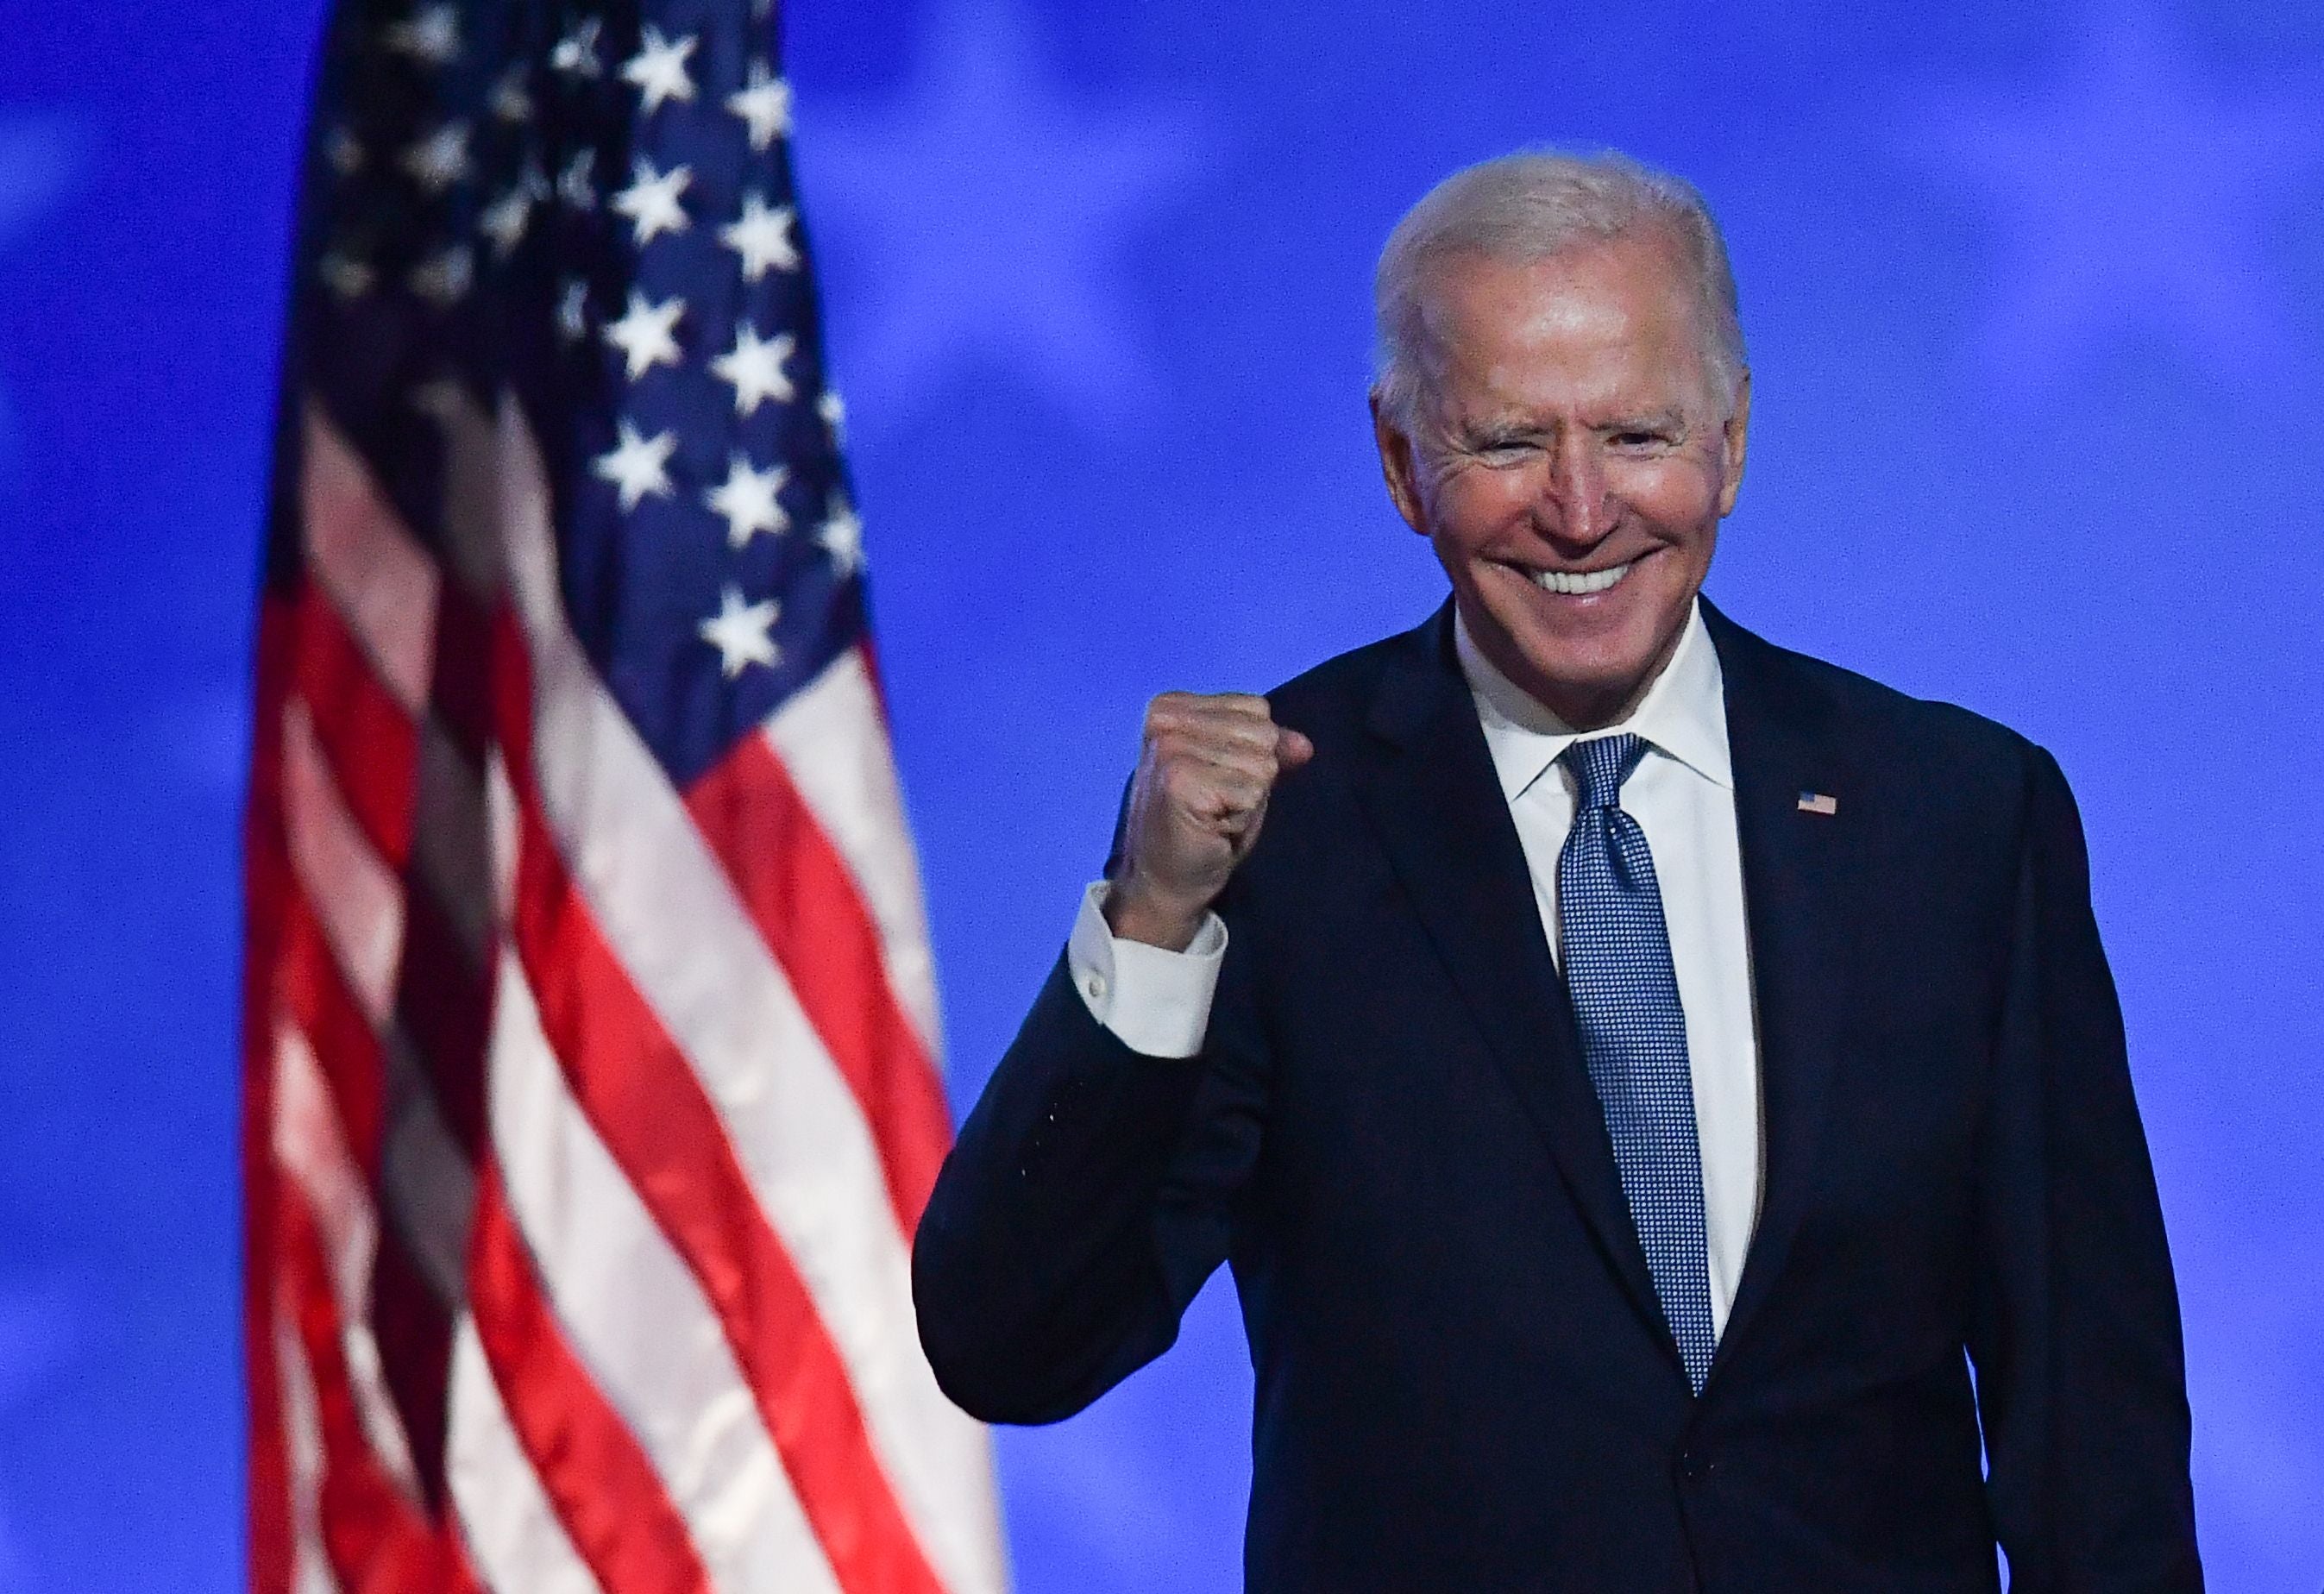 HE’S FIRED: Joe Biden Defeats Donald Trump To Become The 46th President Of The United States